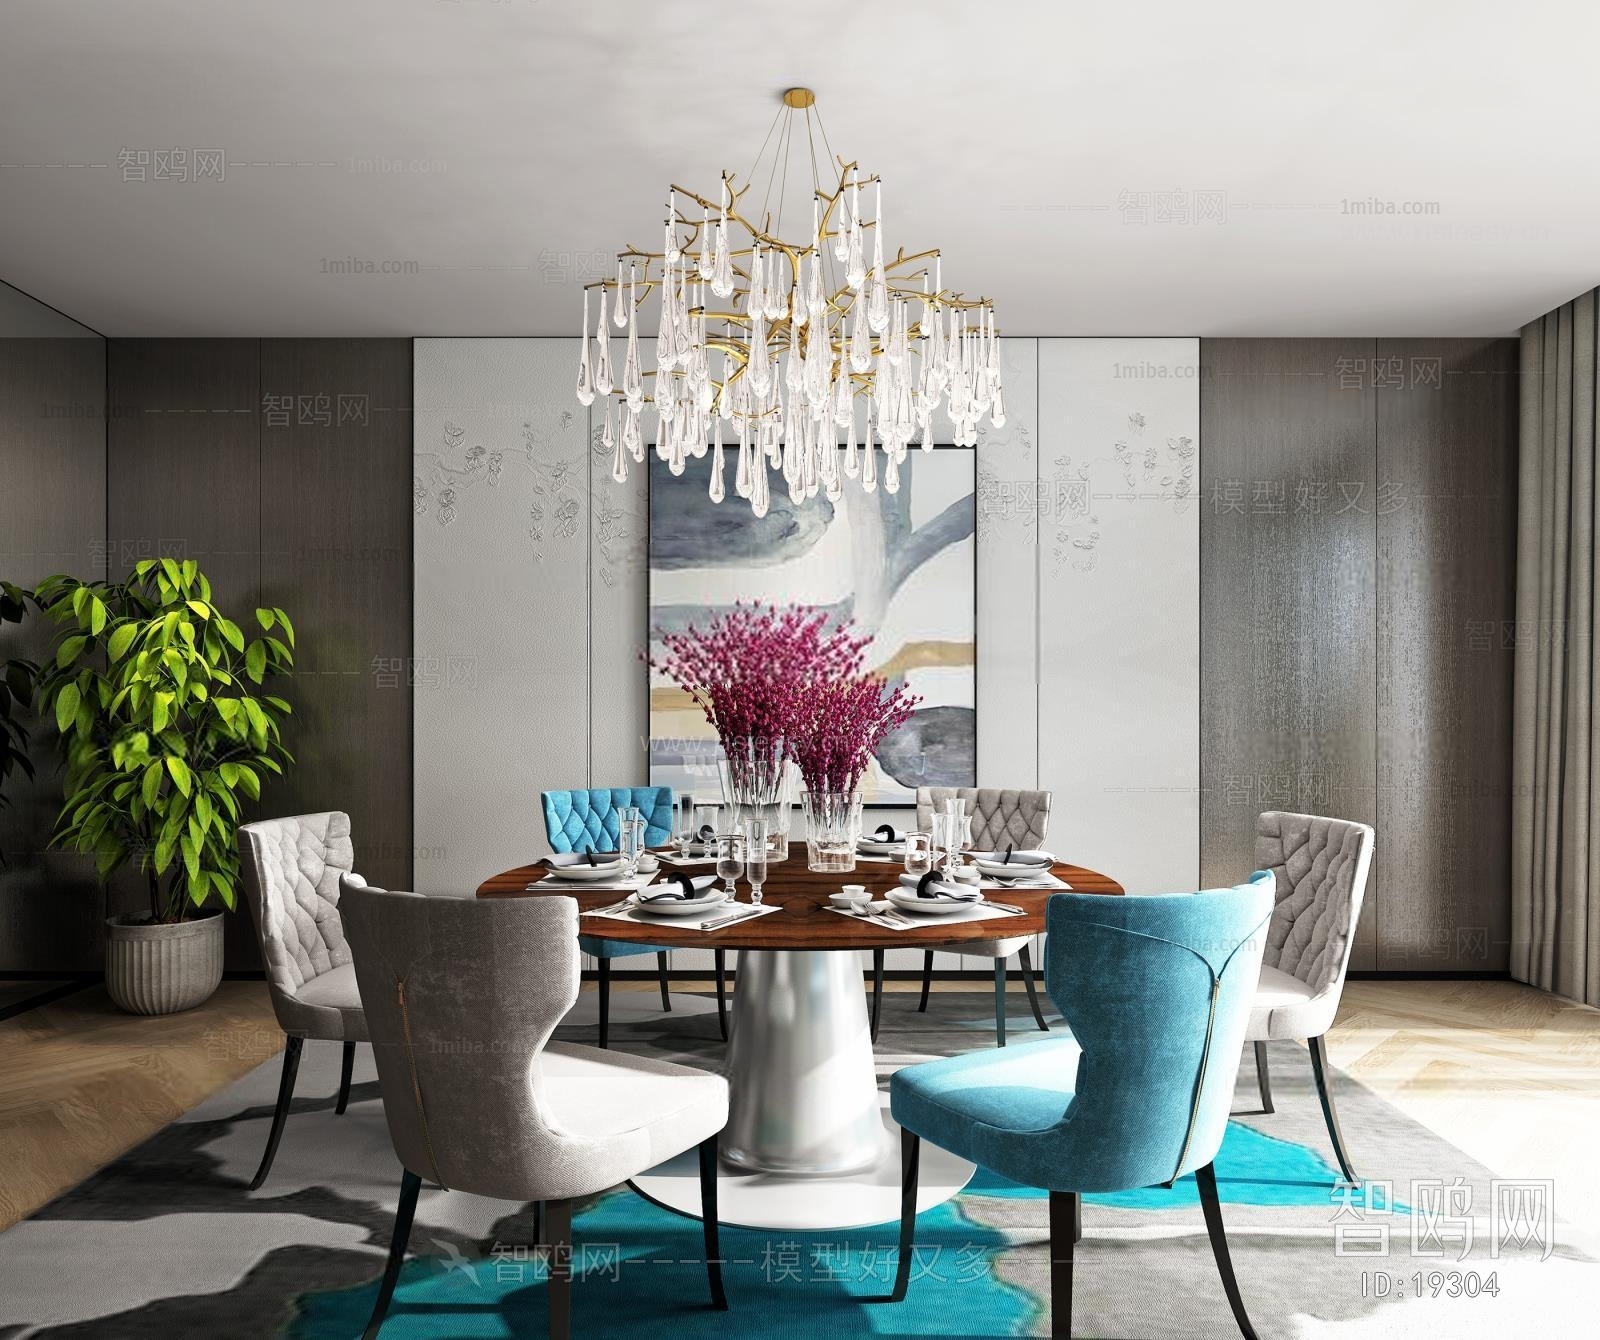 Modern Post Modern Style Dining Table And Chairs